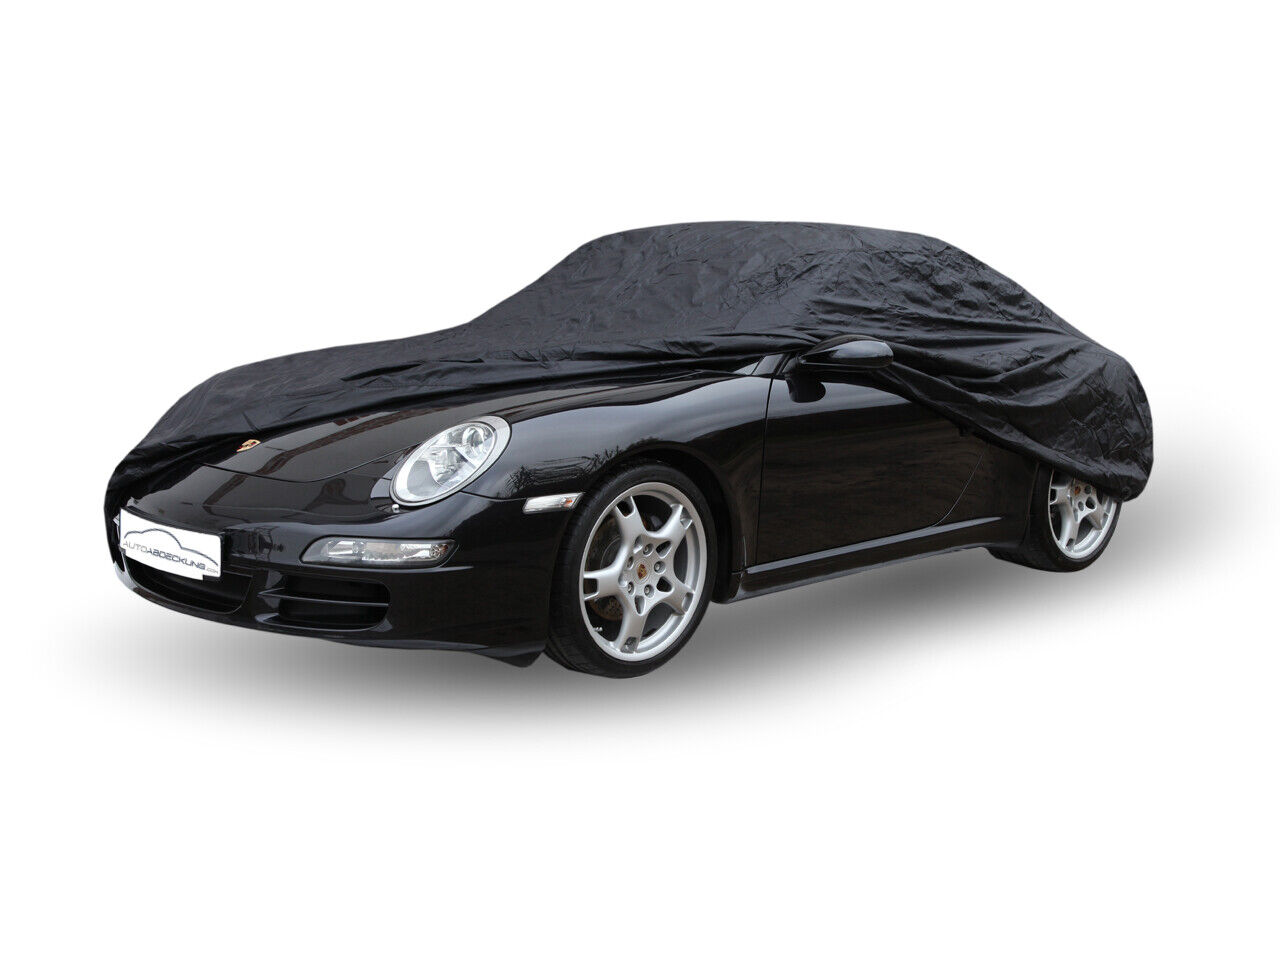 Protective cover tub fits Wiesmann GT MF5